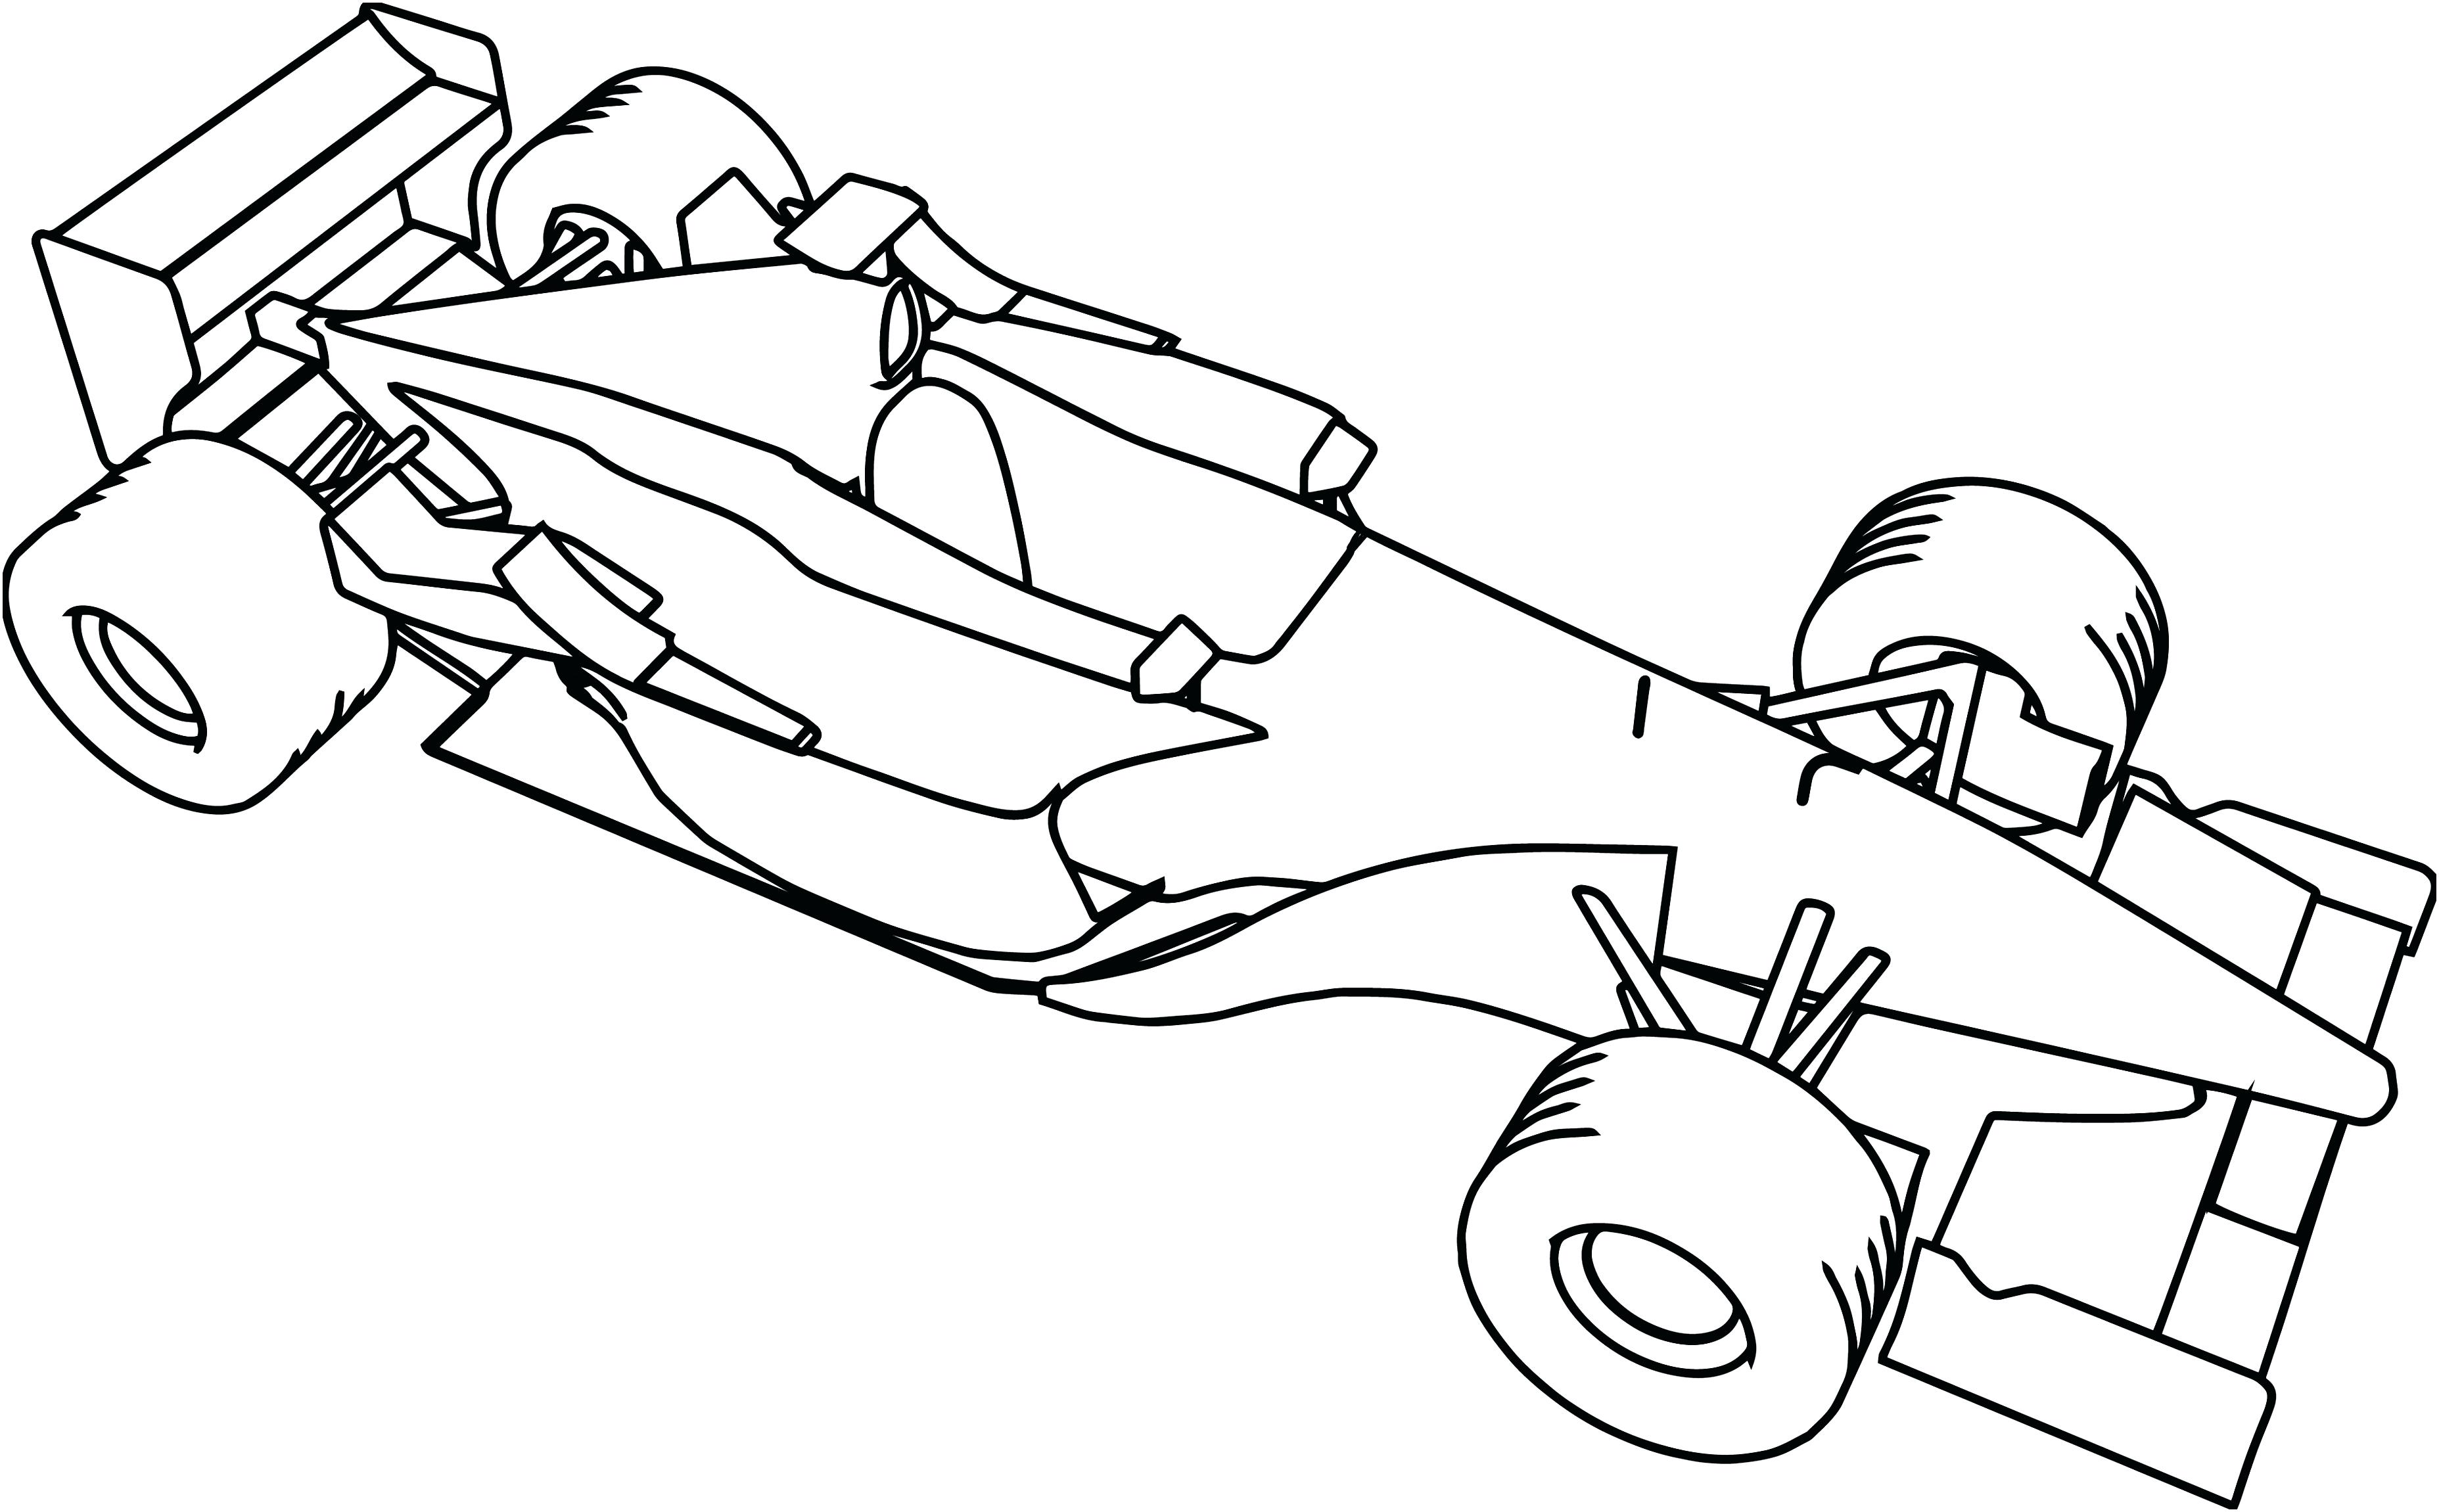 F1 Car Coloring Pages at Free printable colorings